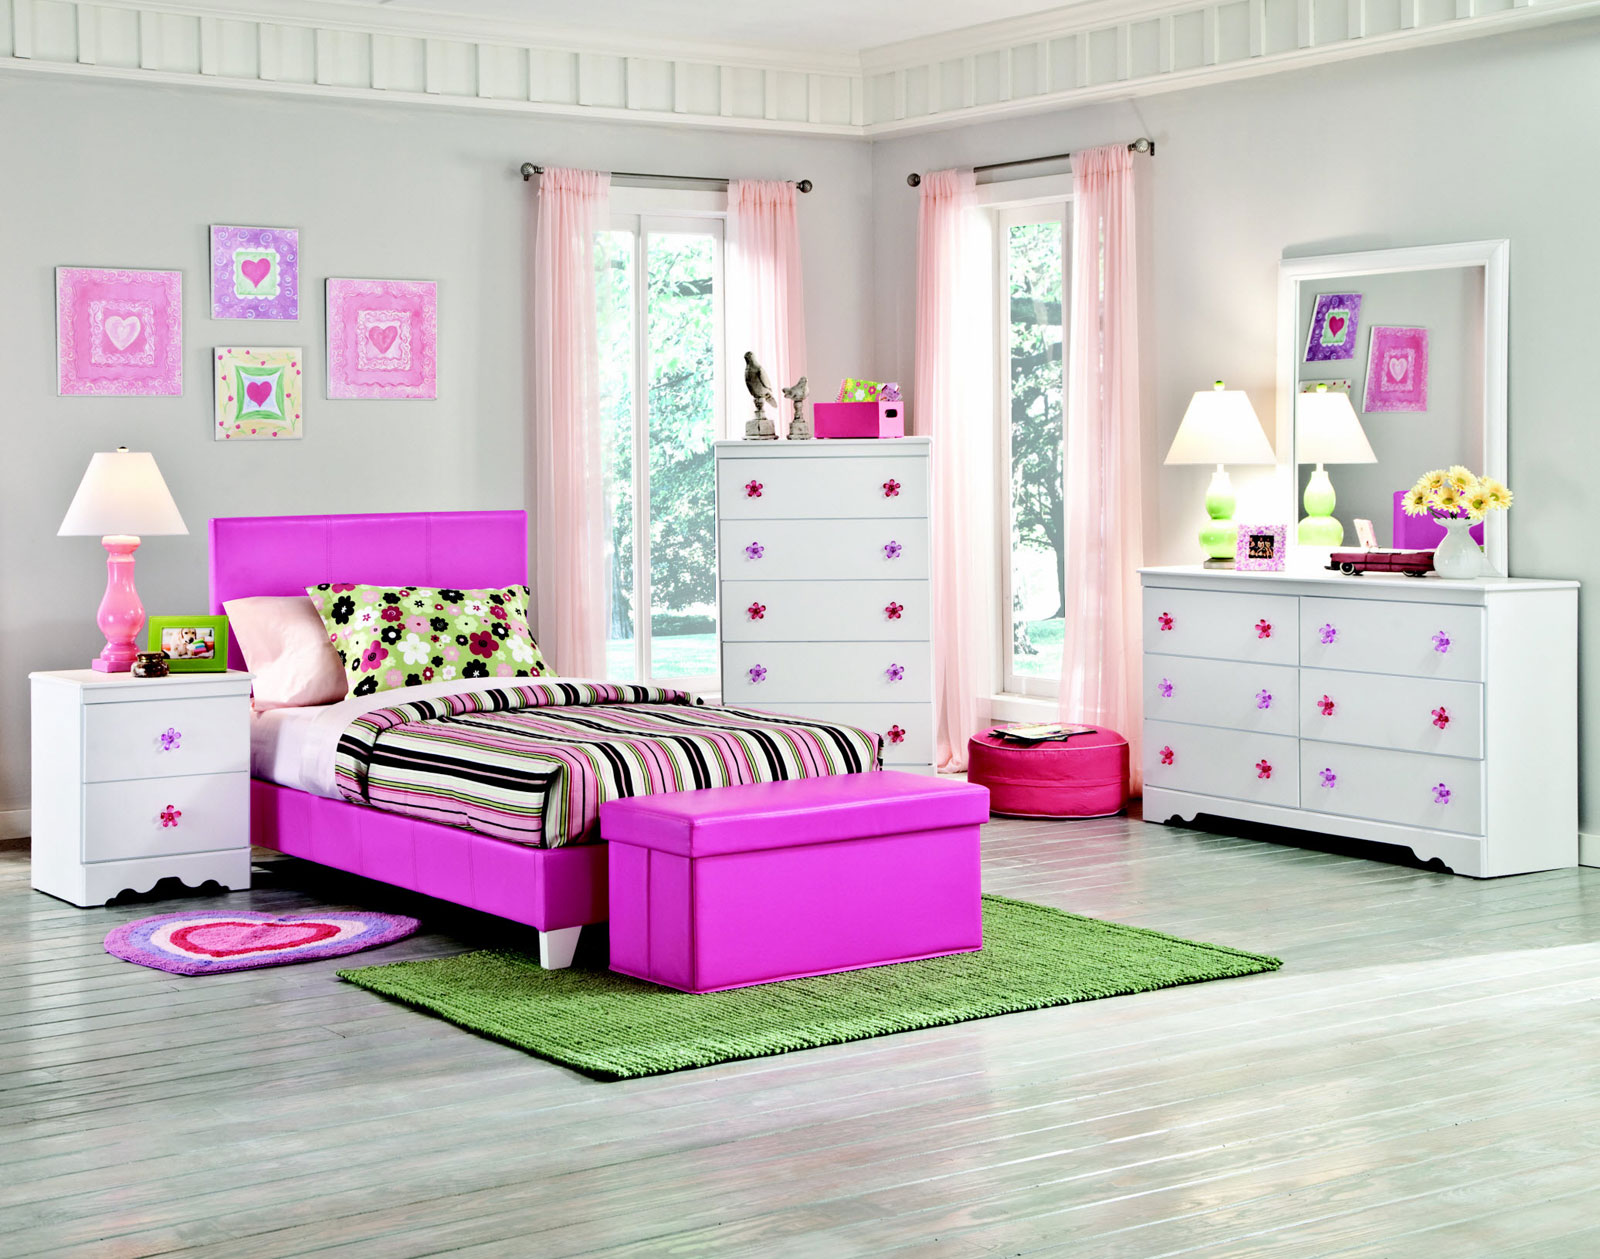 White And Bedroom Marvelous White And Pink Girls Bedroom Sets Including Single Bed And Bench Storage Completed By Night Lamp With Nightstand And Furnished With Drawers Sets Bedroom Girls Bedroom Sets: Combining The Cute Aspects